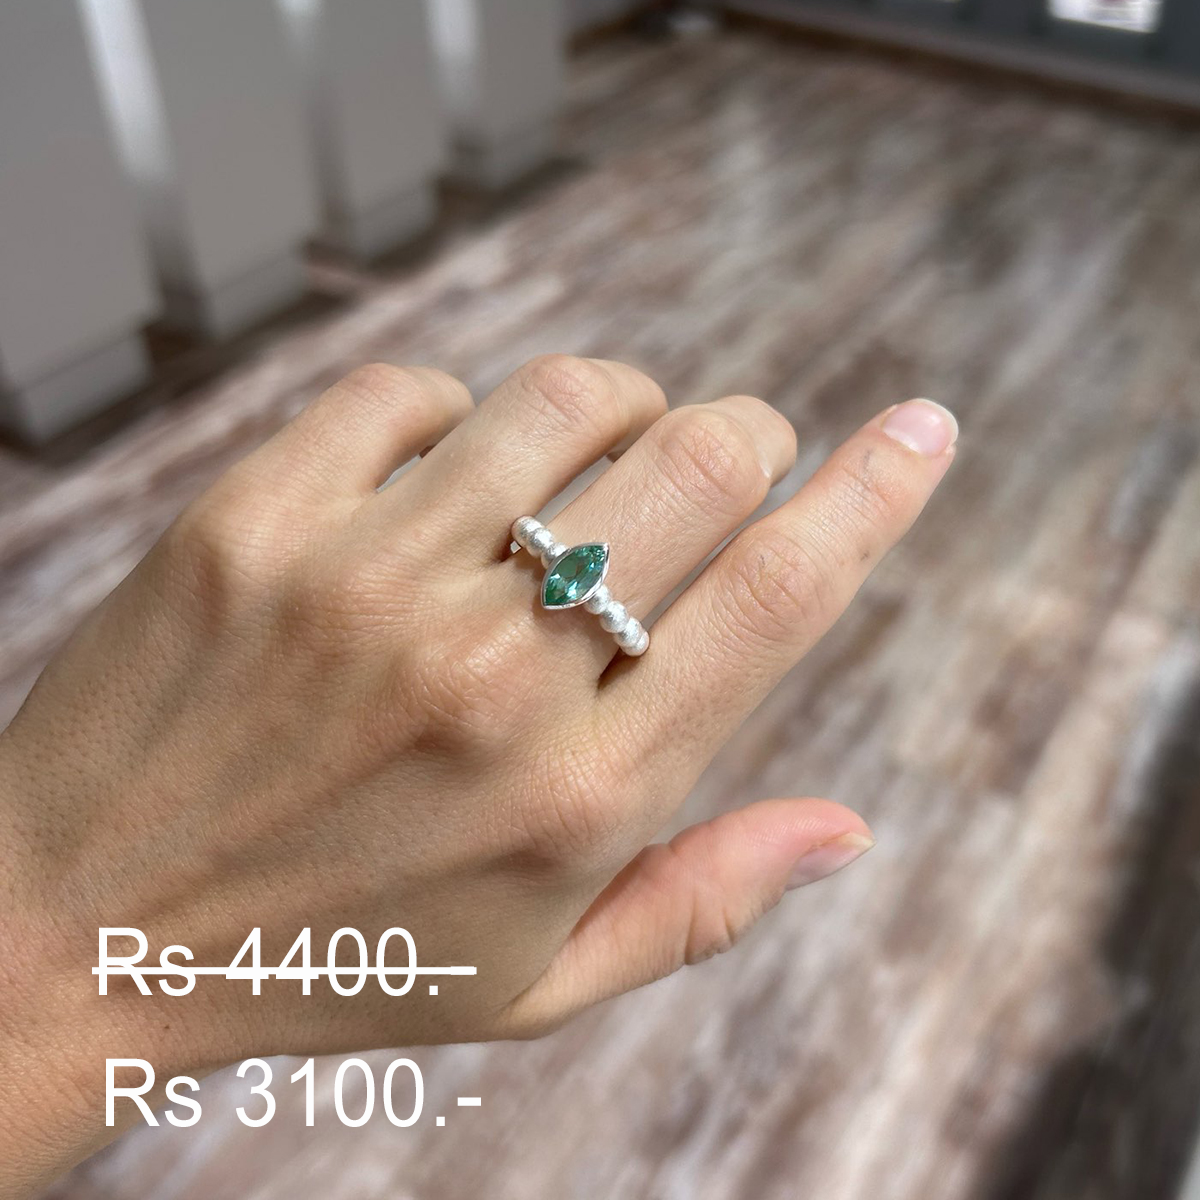 Discounted turquoise zirconia ring